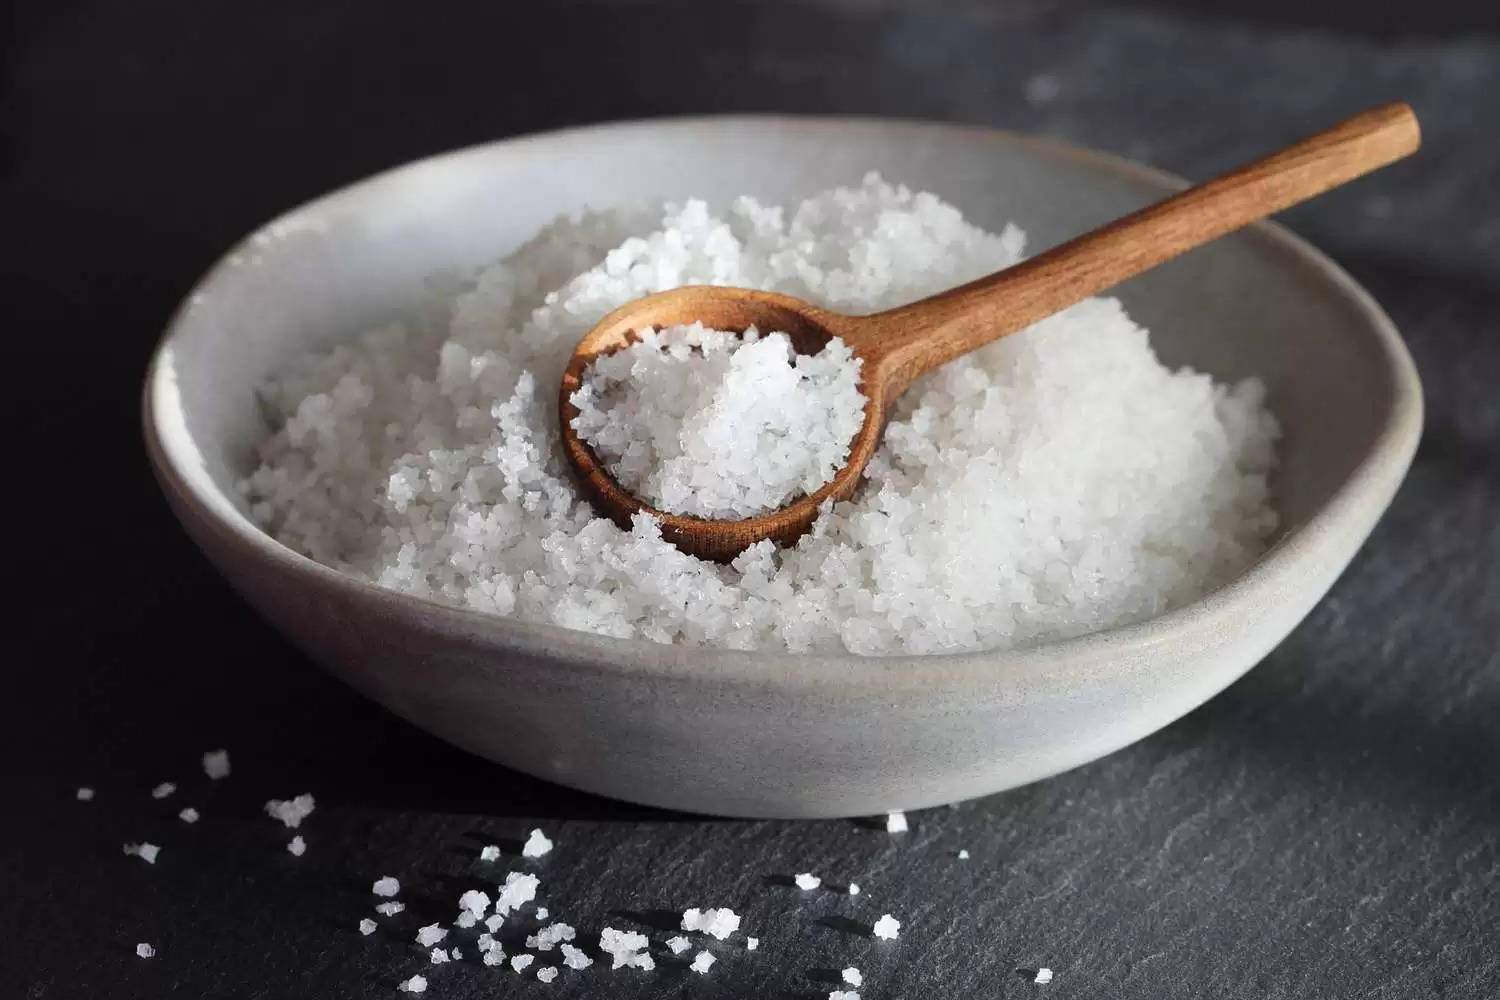 Hair Care Tips: Use sea salt like this to make hair thick and shiny!